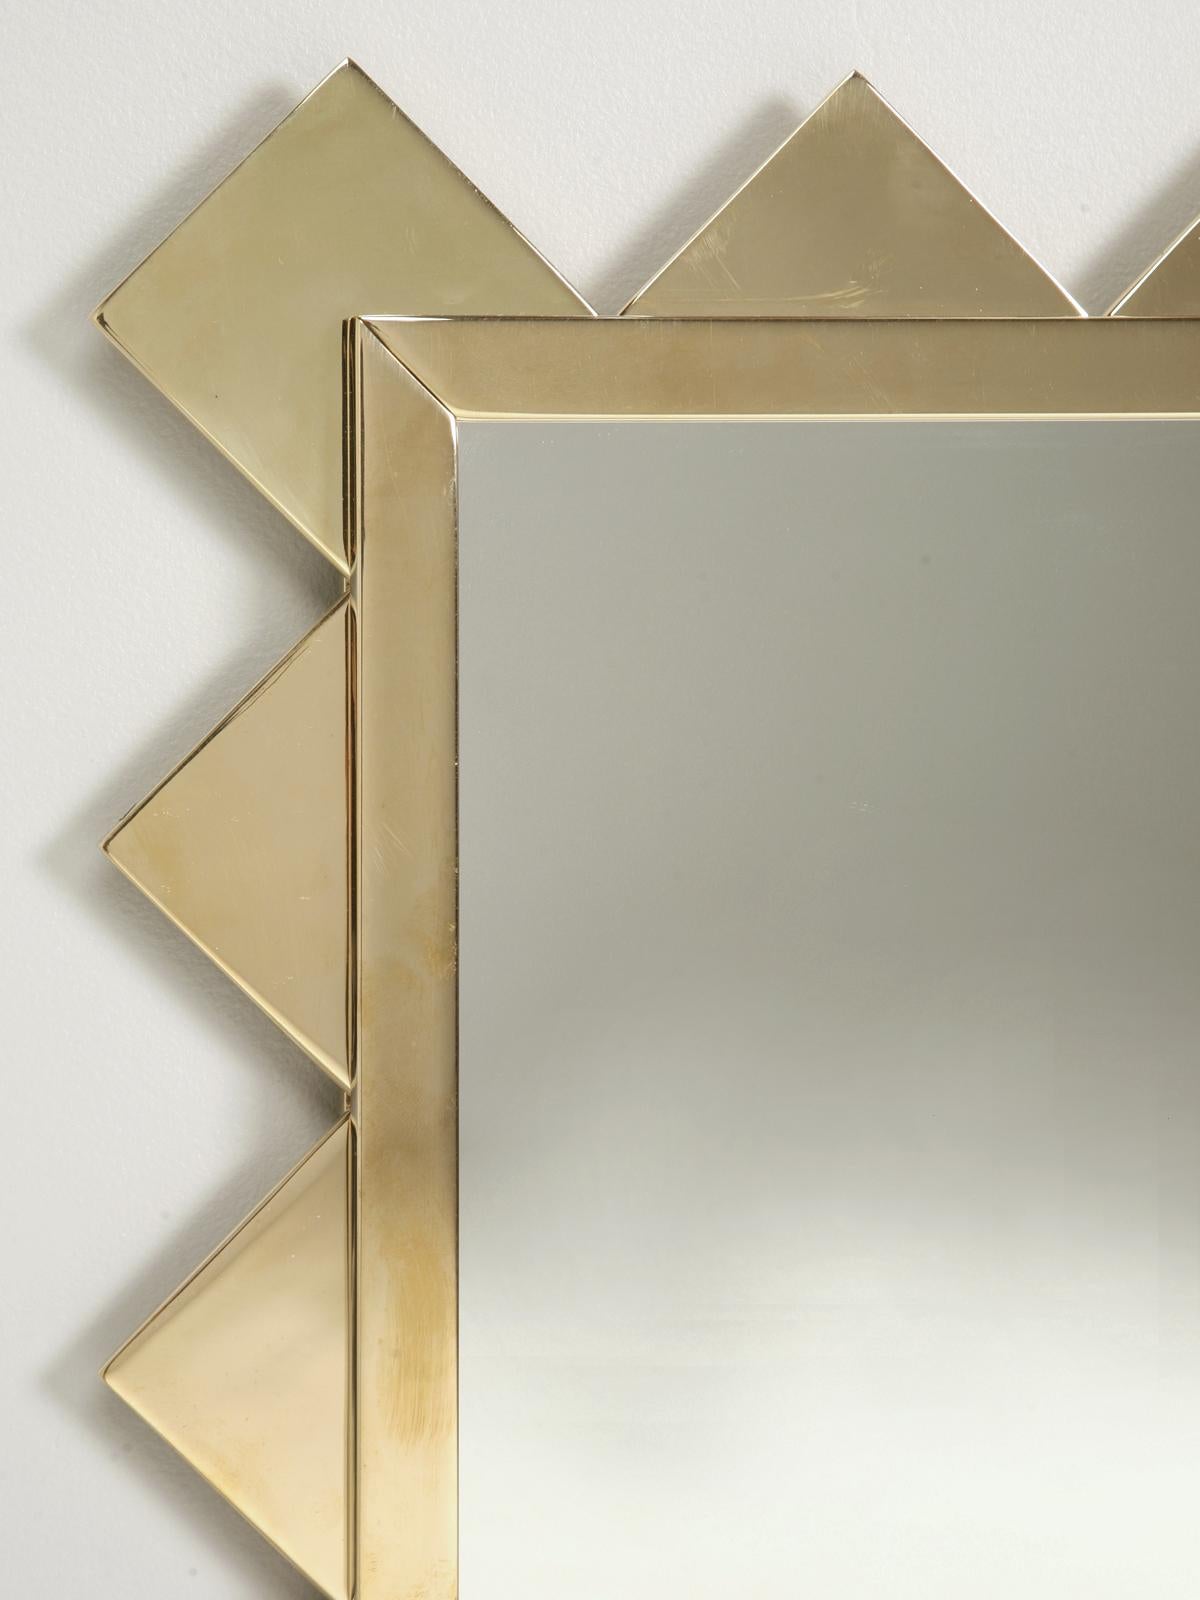 Commonly referred to as a Shark Tooth mirror and since they are never in the exact size you require, we decided to fabricate them in house and can now offer the mirrors in any size you desire. Please note; they will vary a smidge because of the